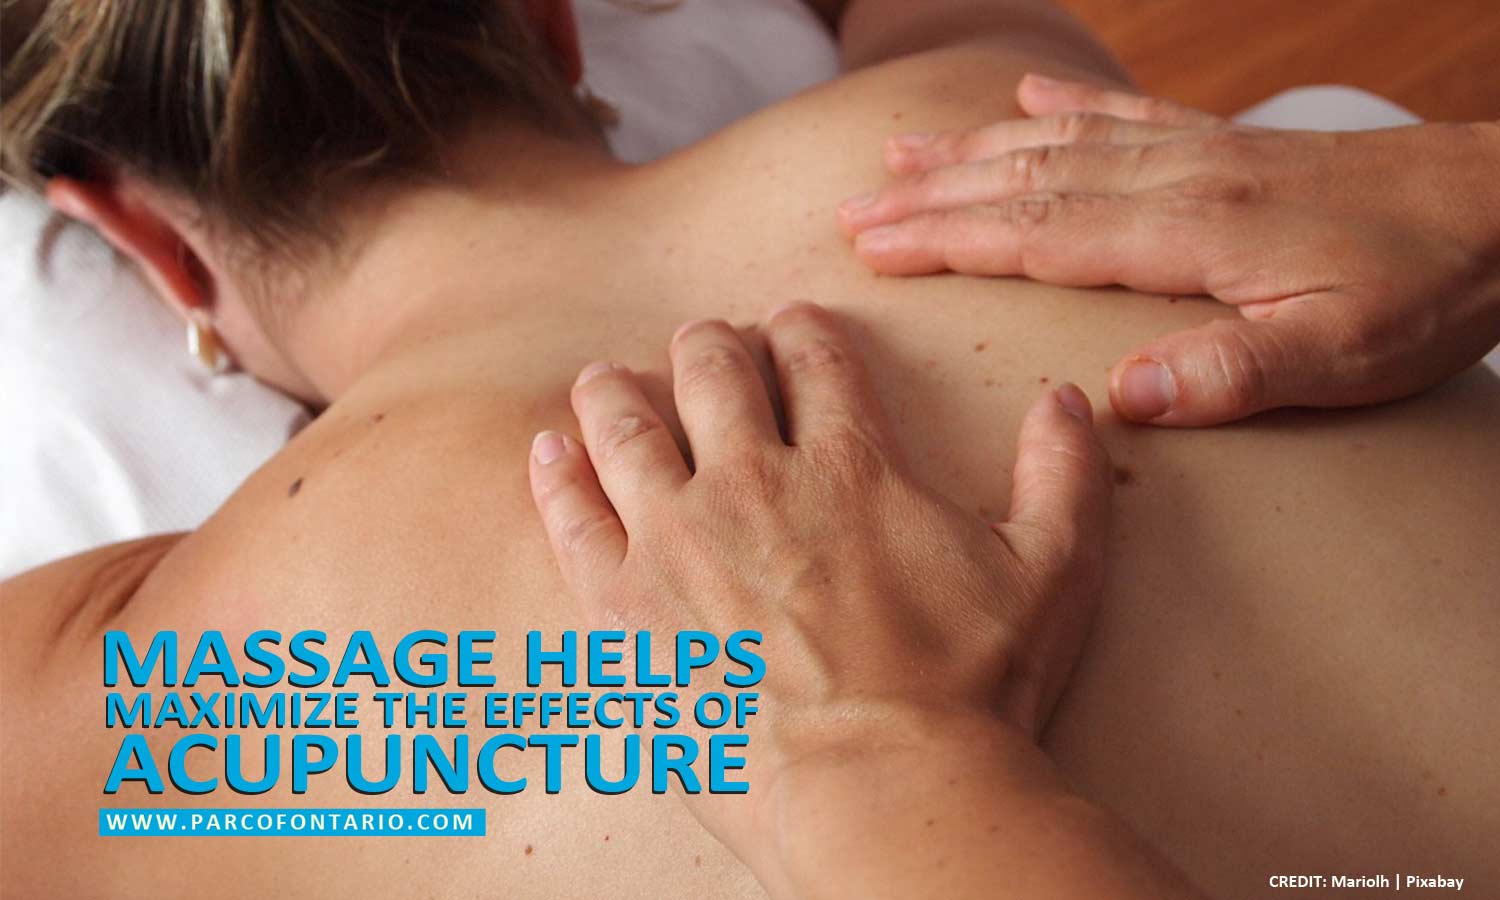 Massage helps maximize the effects of acupuncture